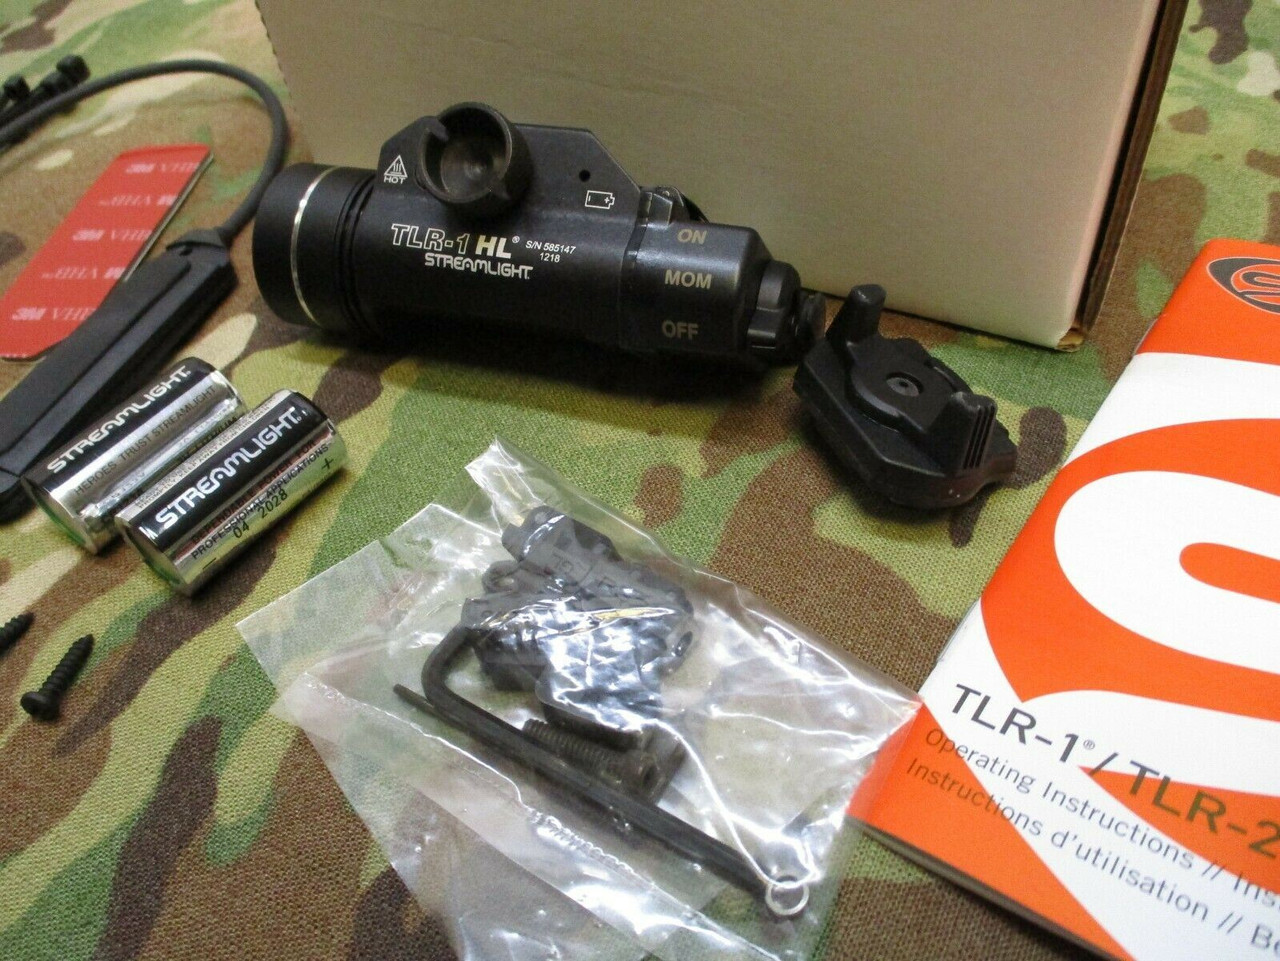 NEW STREAMLIGHT TLR-1 HL 800 LUMEN RIFLE/PISTOL LIGHT w/ PRESSURE CABLE SWITCH